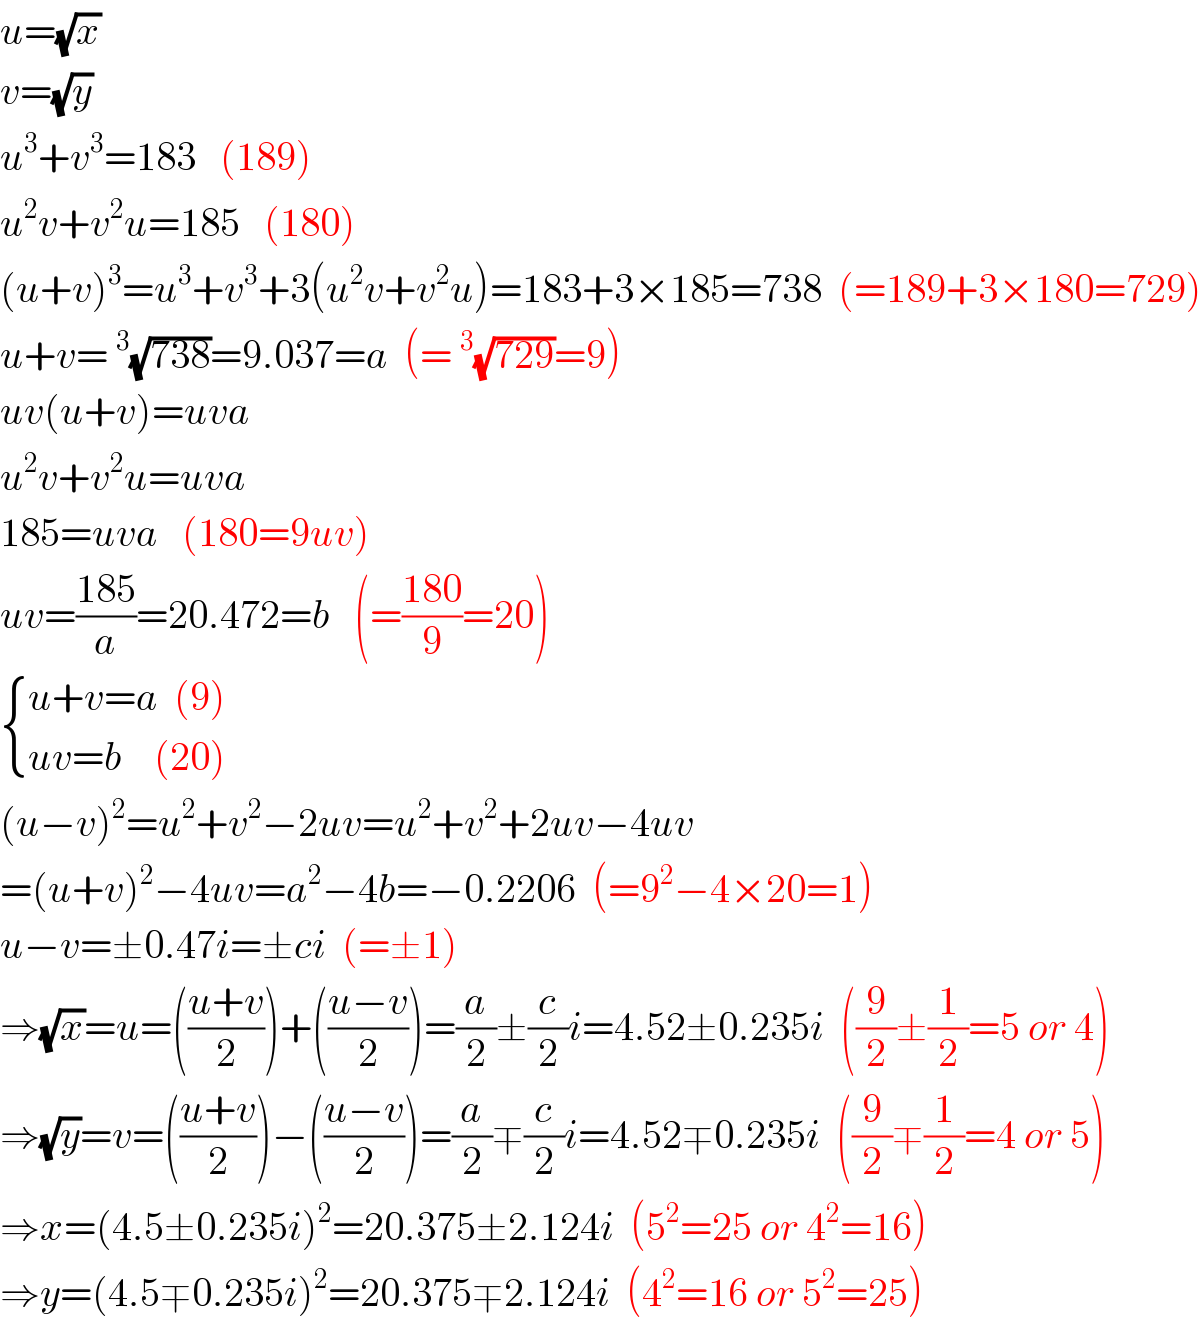 u=(√x)  v=(√y)  u^3 +v^3 =183   (189)  u^2 v+v^2 u=185   (180)  (u+v)^3 =u^3 +v^3 +3(u^2 v+v^2 u)=183+3×185=738  (=189+3×180=729)  u+v=^3 (√(738))=9.037=a  (=^3 (√(729))=9)  uv(u+v)=uva  u^2 v+v^2 u=uva  185=uva   (180=9uv)  uv=((185)/a)=20.472=b   (=((180)/9)=20)   { ((u+v=a  (9))),((uv=b    (20))) :}  (u−v)^2 =u^2 +v^2 −2uv=u^2 +v^2 +2uv−4uv  =(u+v)^2 −4uv=a^2 −4b=−0.2206  (=9^2 −4×20=1)  u−v=±0.47i=±ci  (=±1)  ⇒(√x)=u=(((u+v)/2))+(((u−v)/2))=(a/2)±(c/2)i=4.52±0.235i  ((9/2)±(1/2)=5 or 4)  ⇒(√y)=v=(((u+v)/2))−(((u−v)/2))=(a/2)∓(c/2)i=4.52∓0.235i  ((9/2)∓(1/2)=4 or 5)  ⇒x=(4.5±0.235i)^2 =20.375±2.124i  (5^2 =25 or 4^2 =16)  ⇒y=(4.5∓0.235i)^2 =20.375∓2.124i  (4^2 =16 or 5^2 =25)  